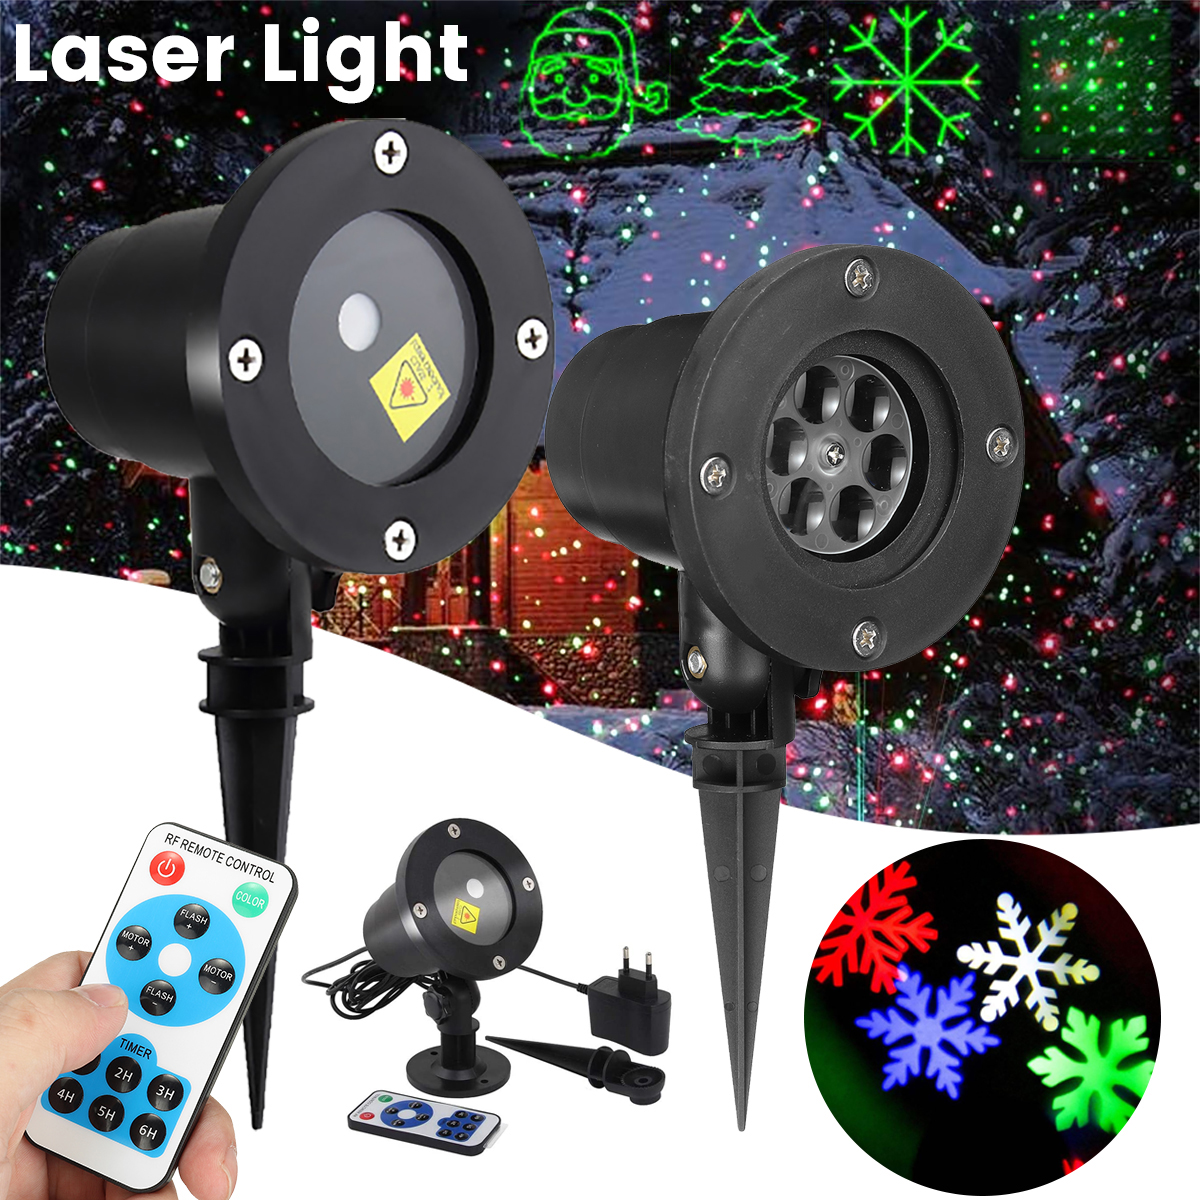 Christmas-Party-LED-Light-Full-Sky-Star-Laser-Projector-Red-Green-Laser-Lamp-For-Outdoor-Garden-Lawn-1917281-1